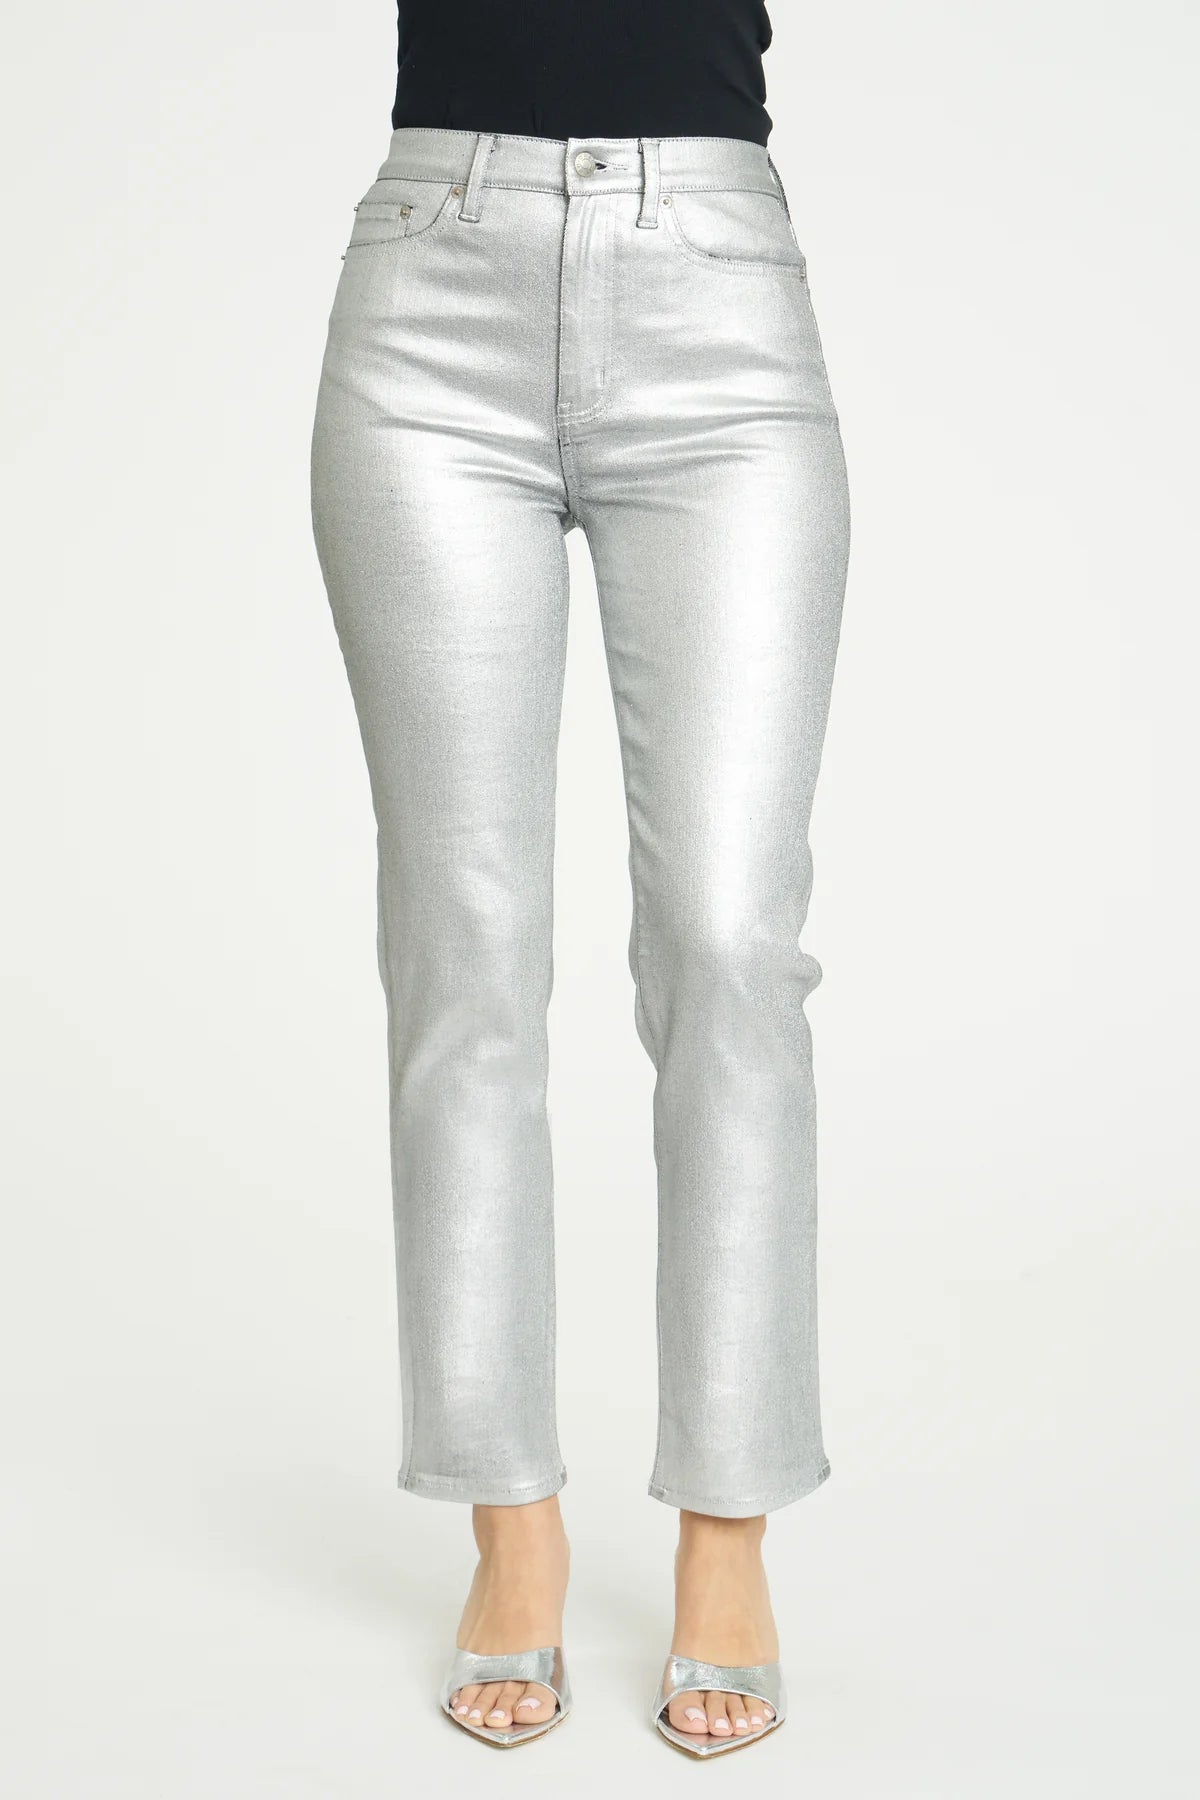 Smarty Pants in Coated Silver